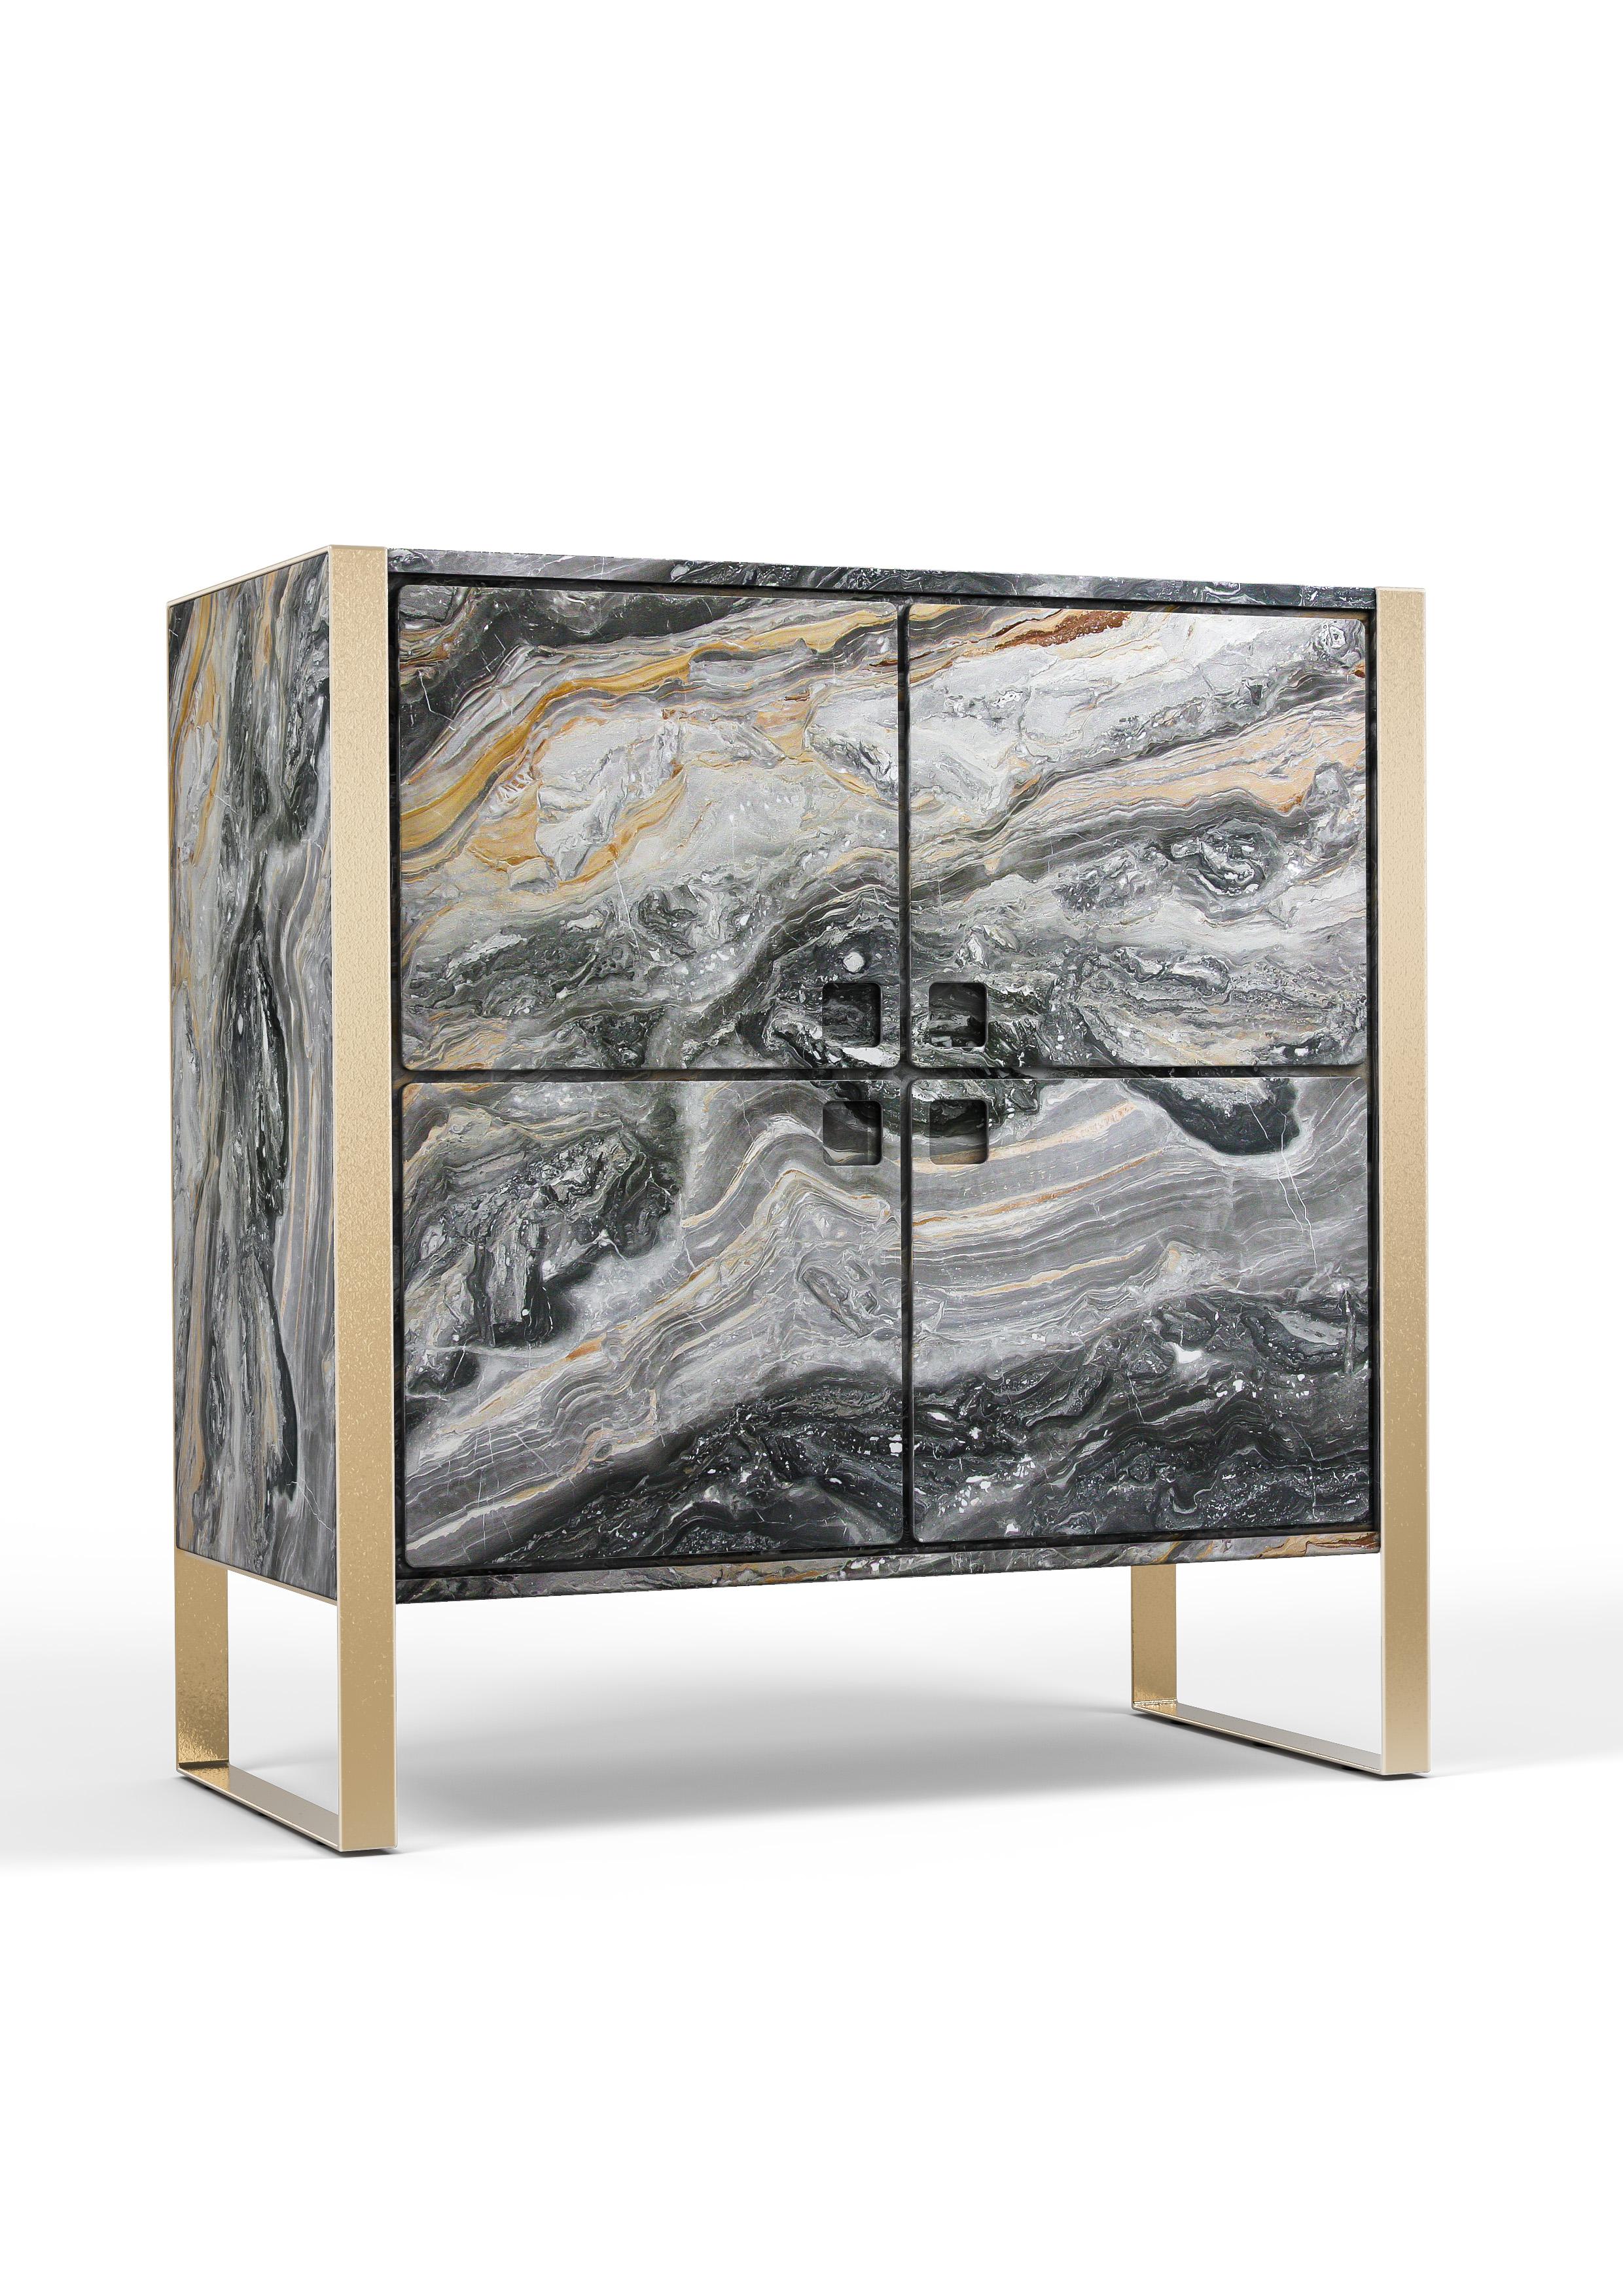 Aida cabinet by Marmi Serafini
Materials: Marble and brass
Dimensions: D 50 x W 110 x H 100 cm


Squared and simple lines enriched with a sophisticated metal structure are allowing the true essence of the material to be admired: marble.

Marmi